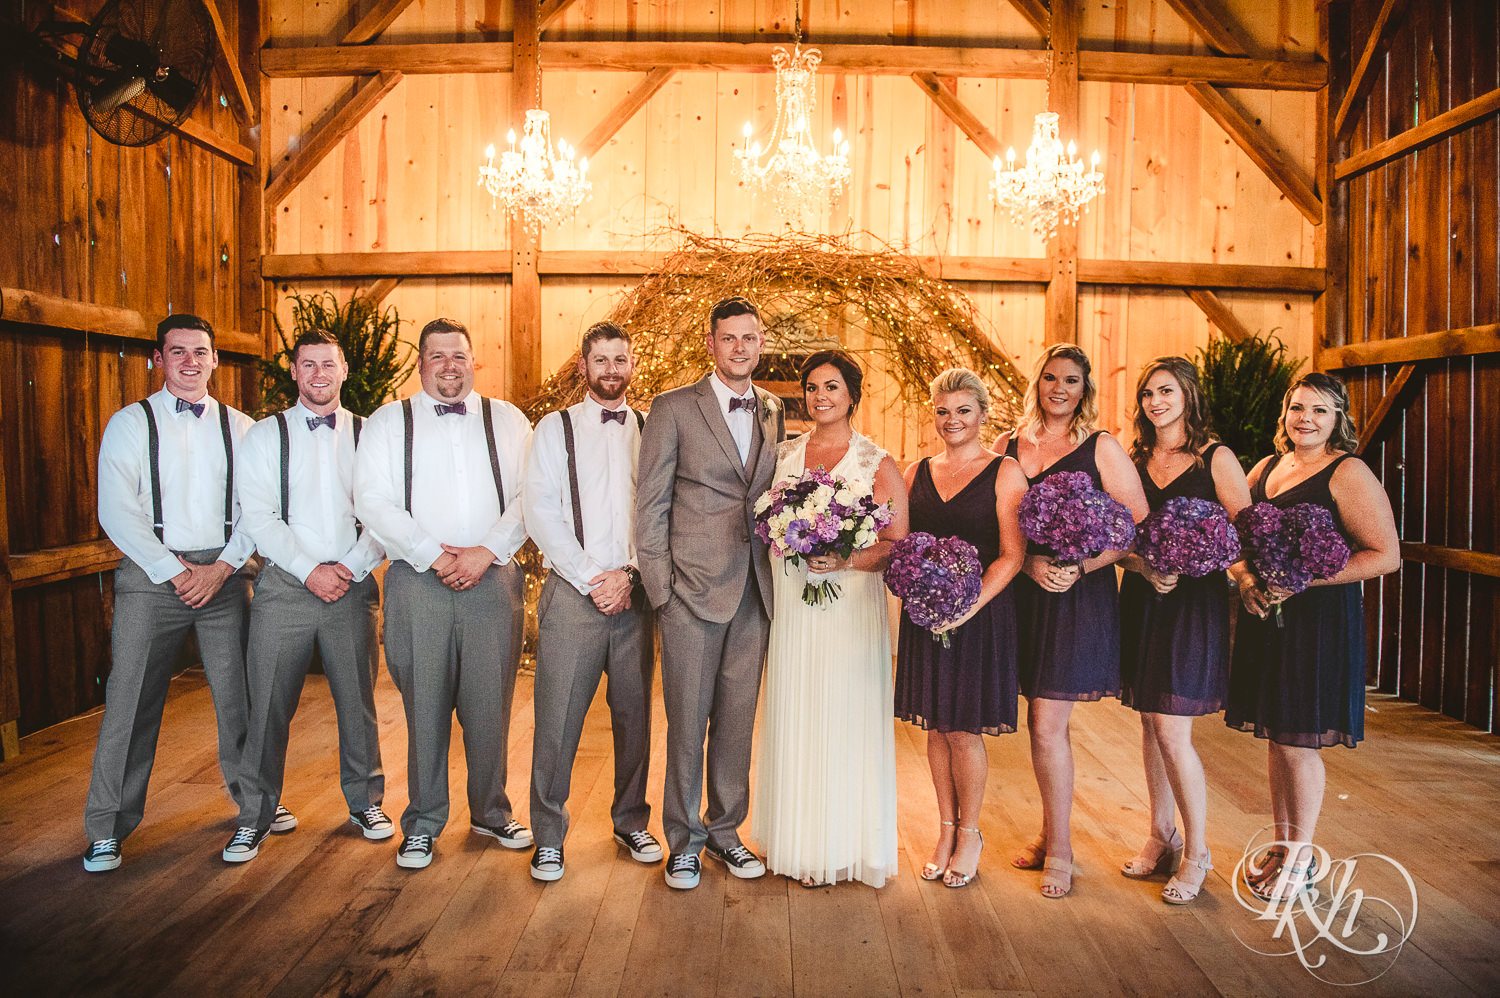 Wedding party smiles in the barn at Camrose Hill Flower Farm in Stillwater, Minnesota.